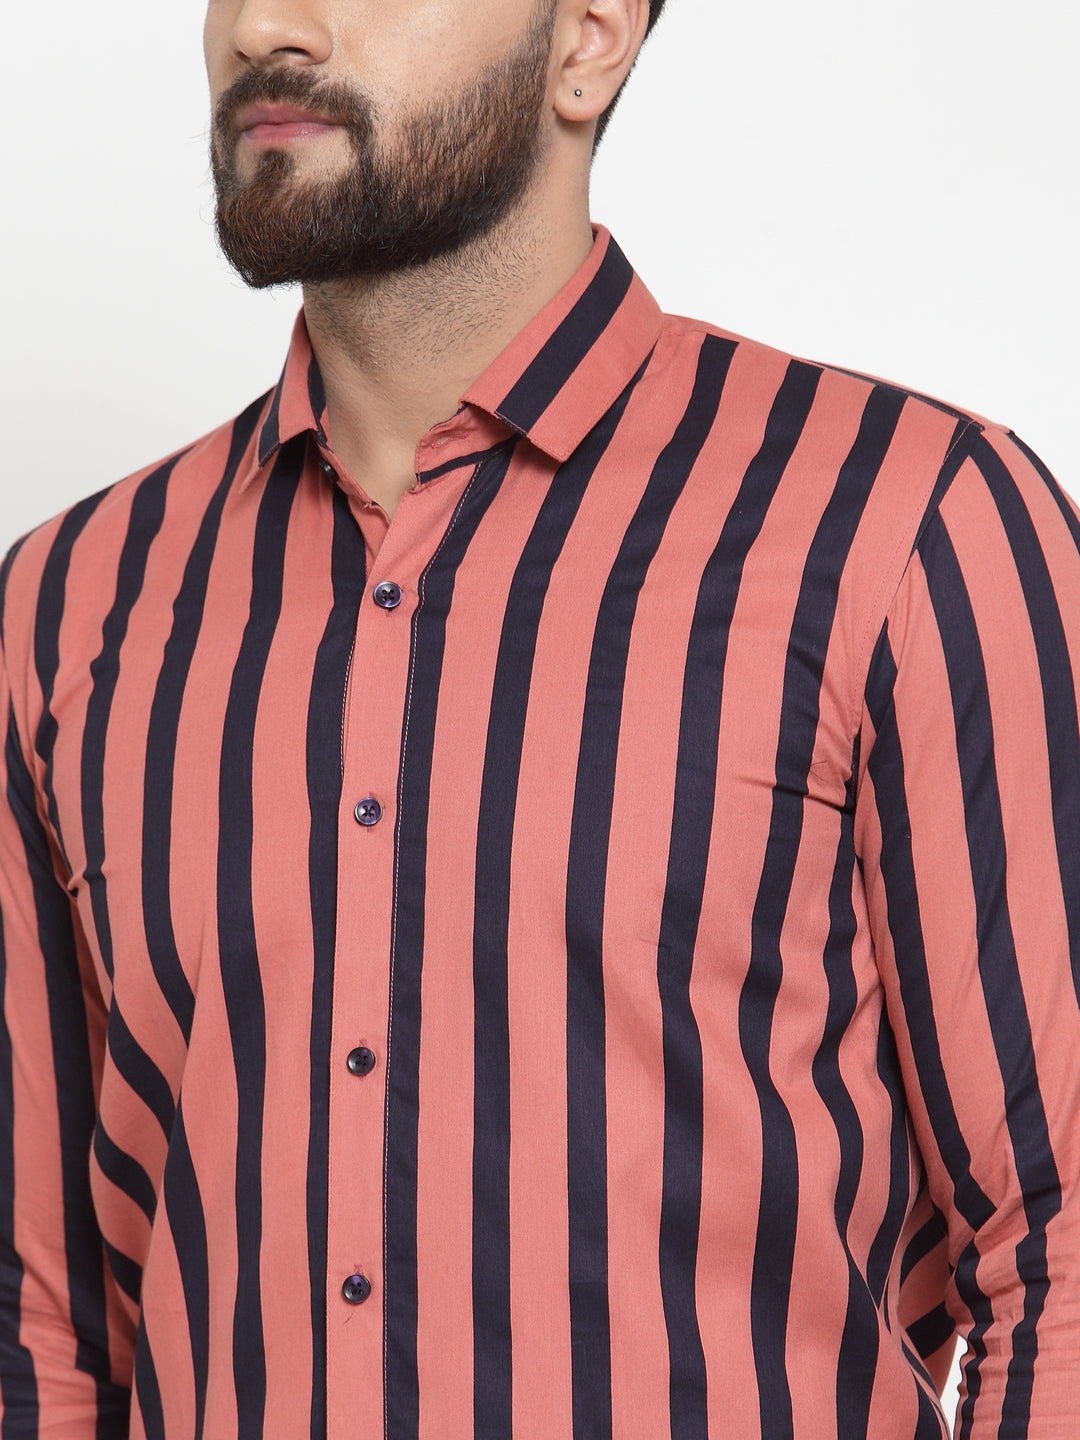 Men's Red Cotton Striped Formal Shirts ( SF 744Coral ) - Jainish